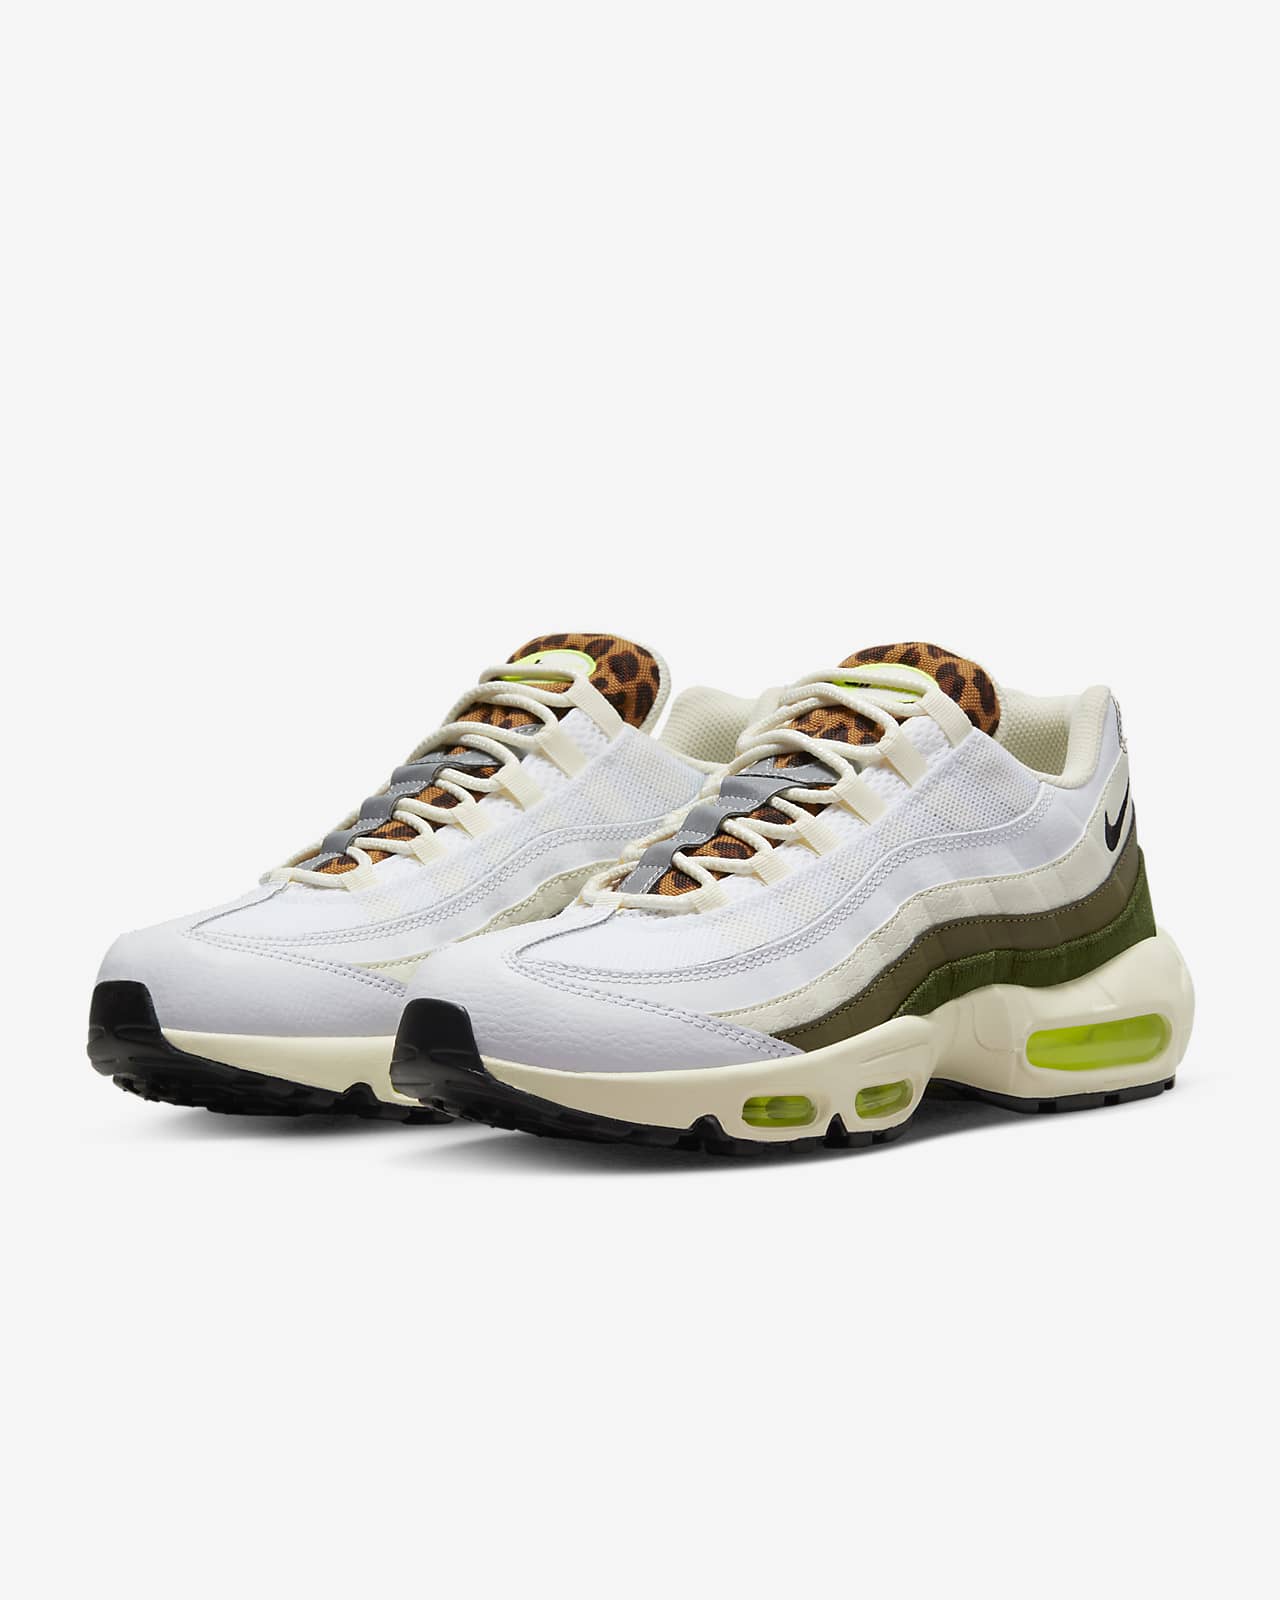 size 7 nike air max 95 shoes